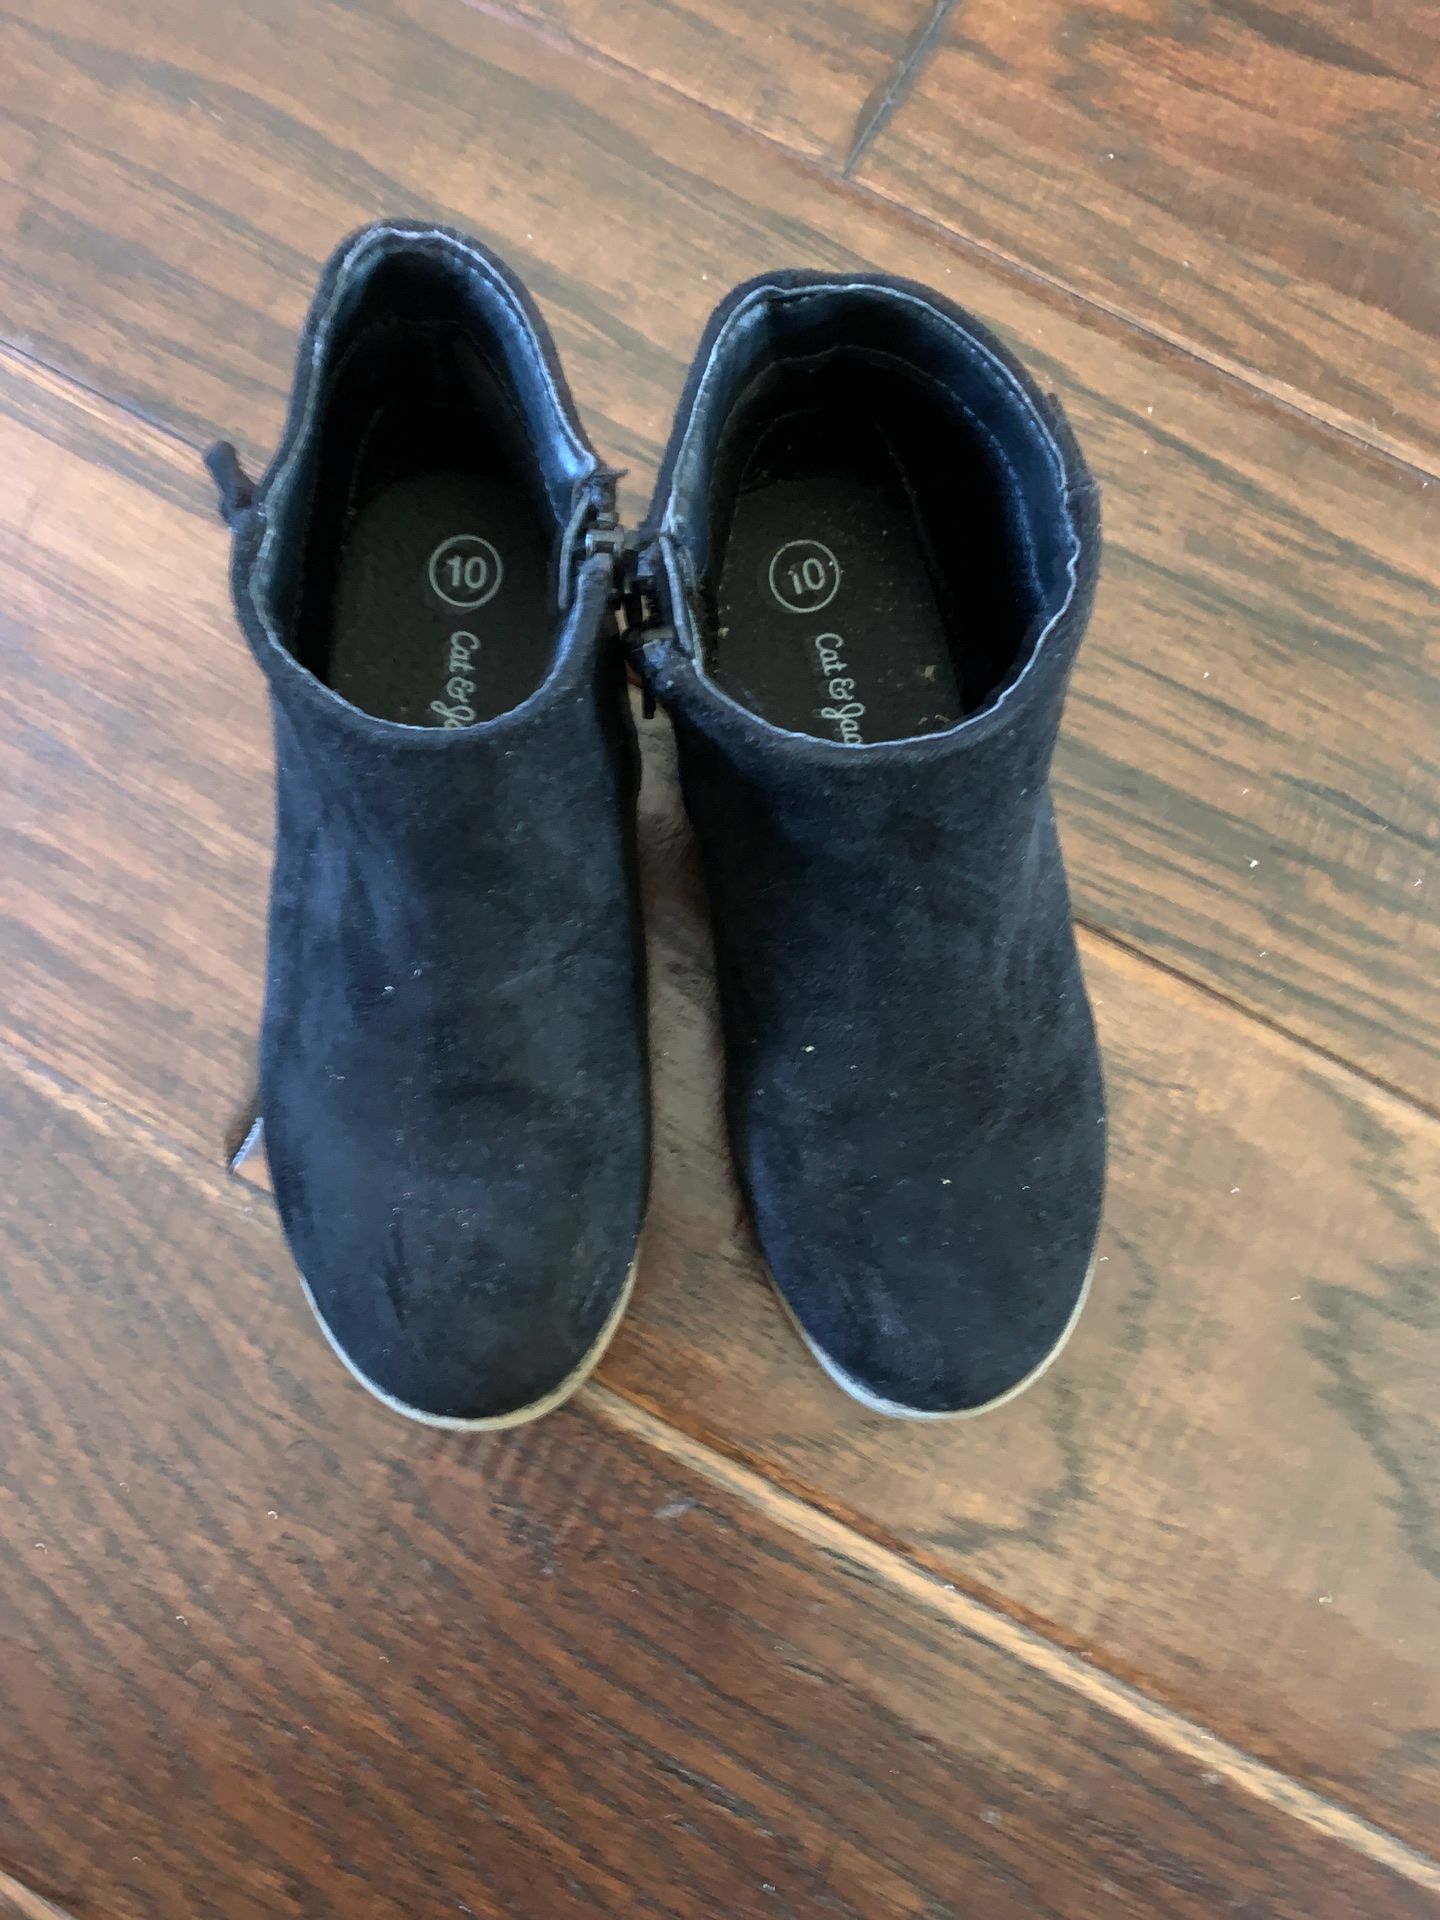 Cat and Jack black size 10 girls boots